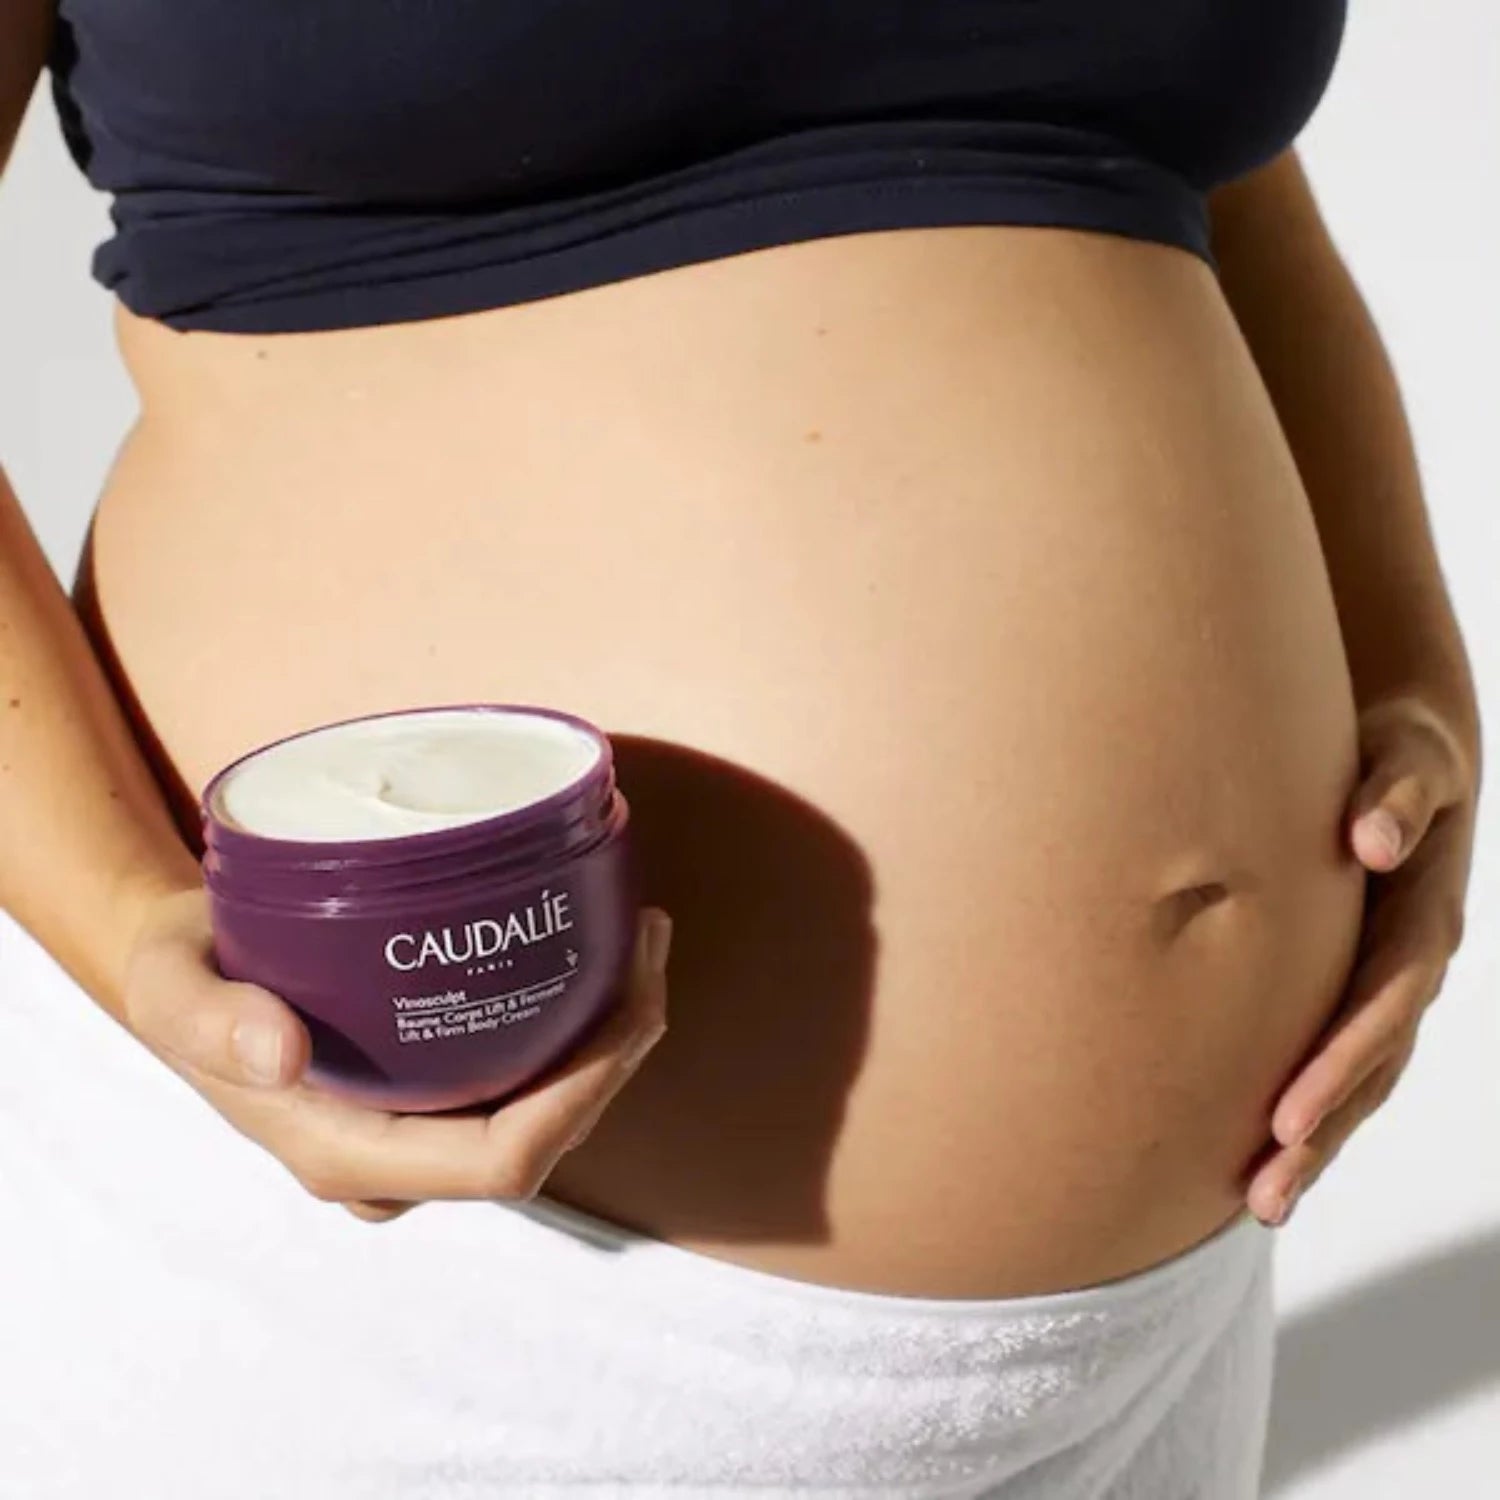 Caudalie Vinosculpt Body Cream Natural ingredients make up 97% of the product's composition, and it has been dermatologically tested and deemed safe for pregnant women.